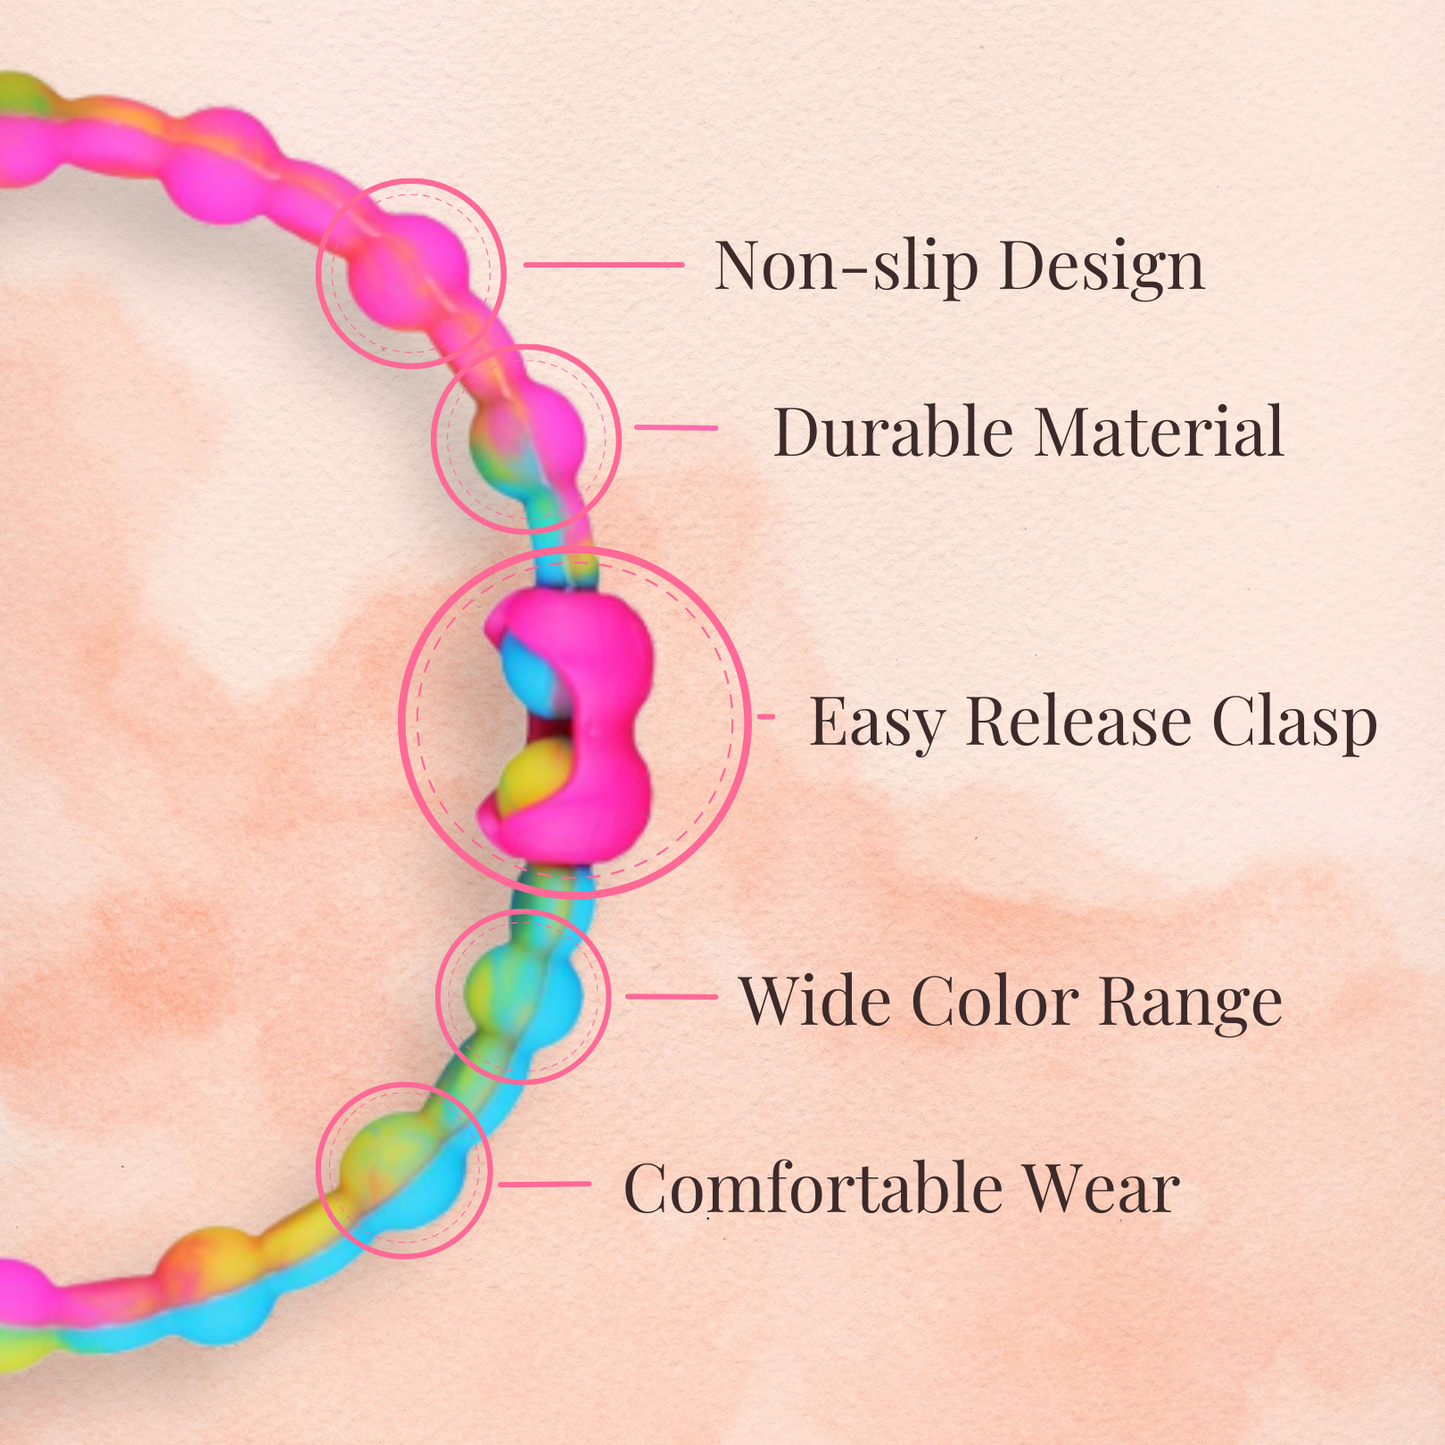 Golden Oasis Pack PRO Hair Ties (4-Pack): Elevate Your Style with Radiant Hues